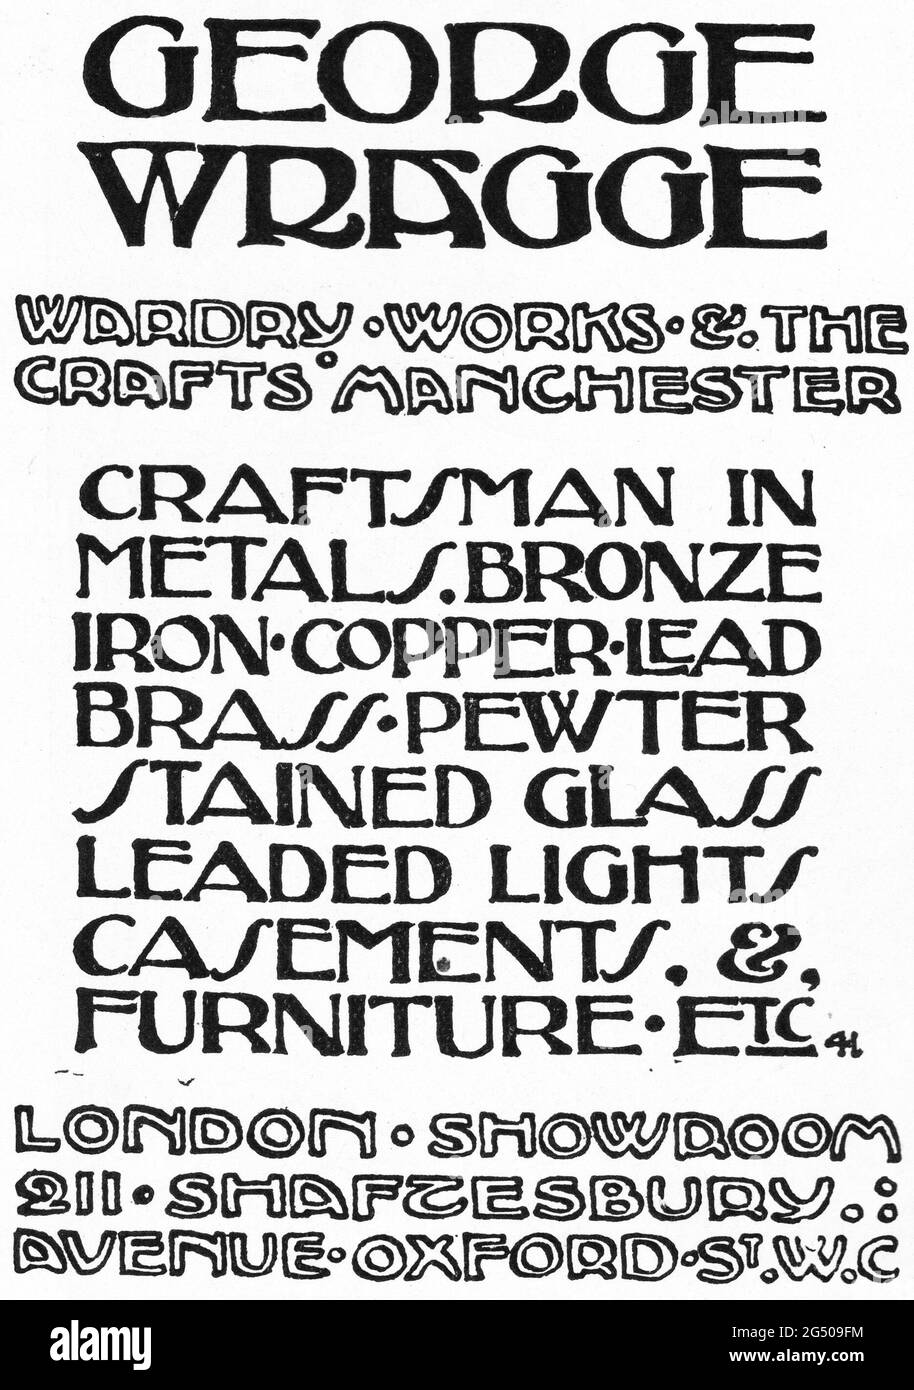 “George Wragg – Wardry Works & The Crafts, Manchester” A 1902 advertisement for George Wragge, “craftsman in metals, bronze, iron, copper, lead, brass, pewter, stained glass, leaded lights, casements & furniture etc. – London Showroom, 211 Shaftesbury Avenue, Oxford Street, London W.C.”. Stock Photo